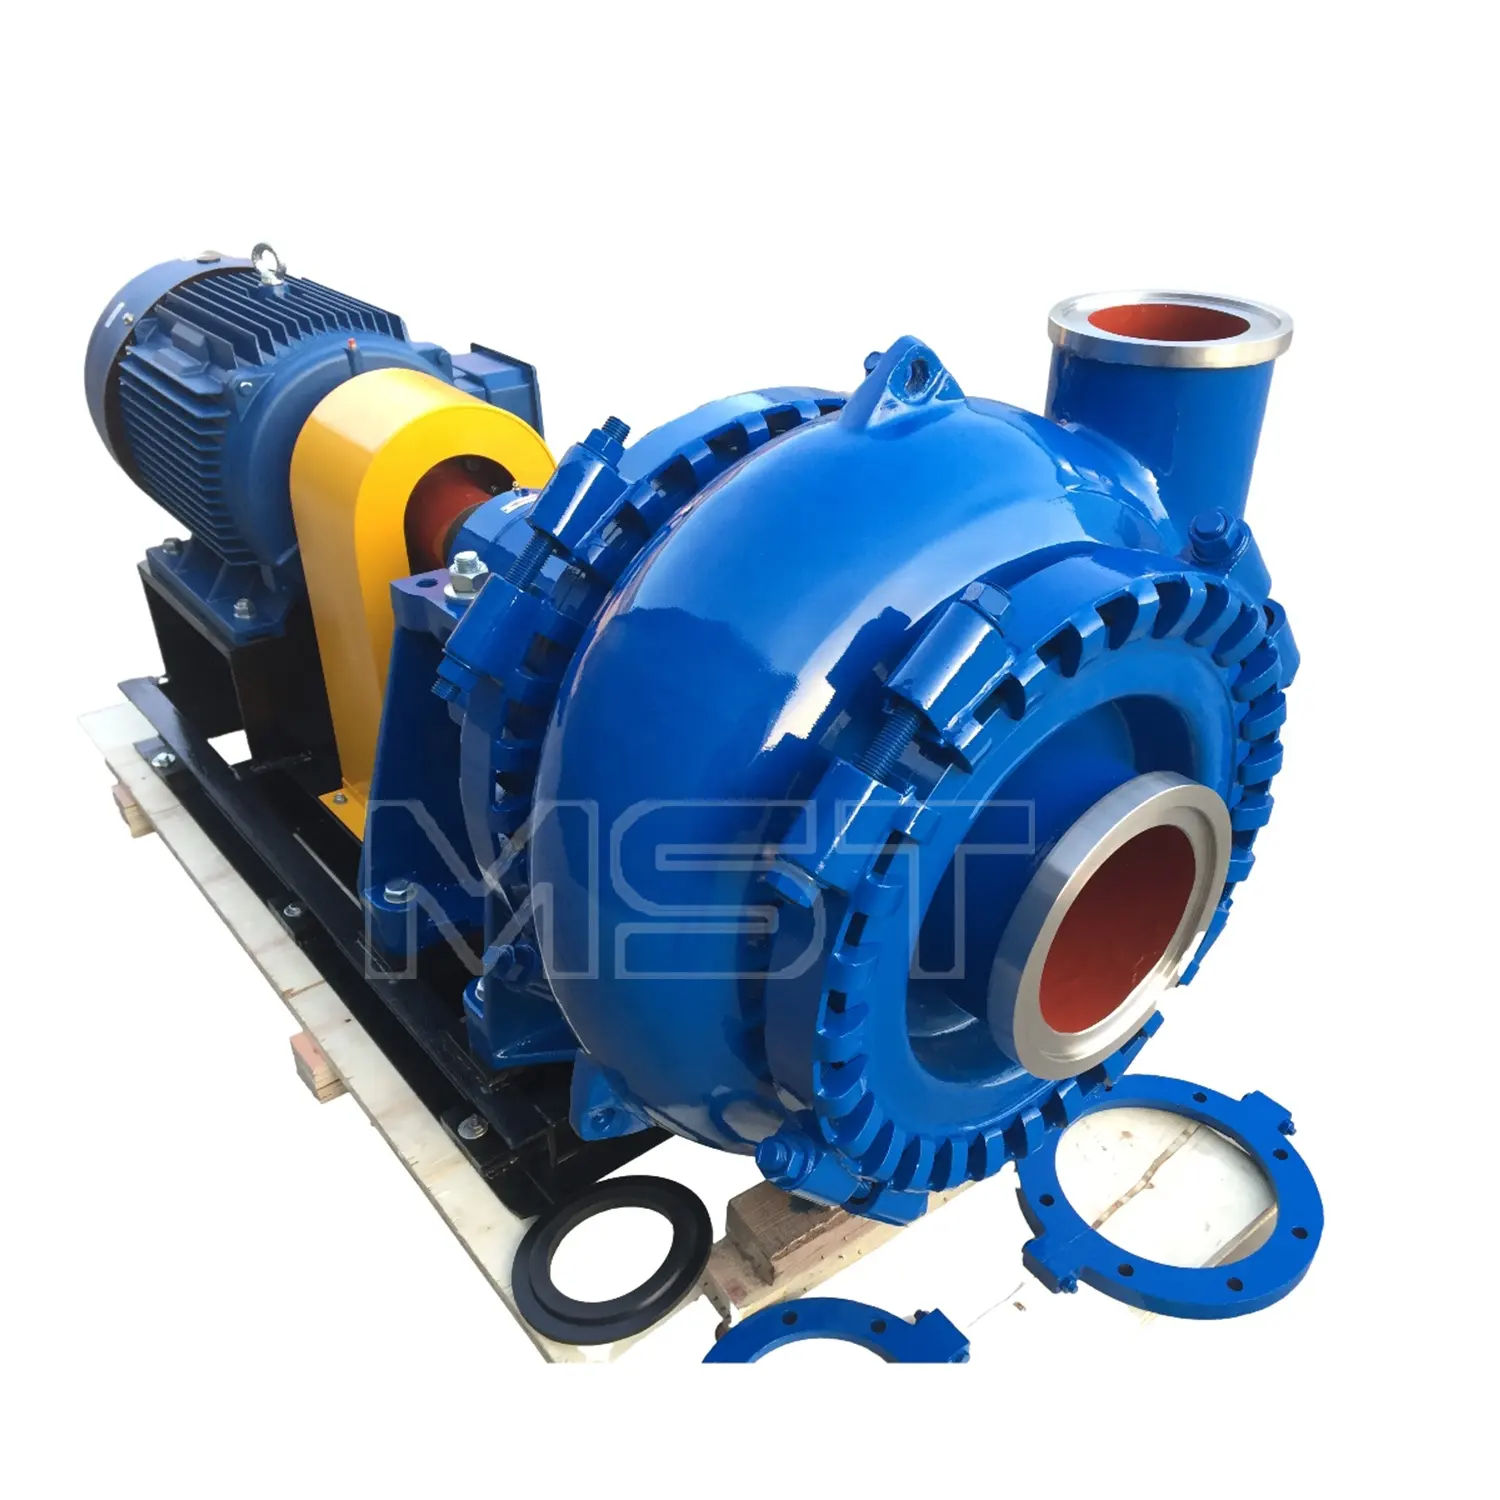 Long distance sand dredge booster pump dredging pumps for mining tunneling construction site beach sea reclamation